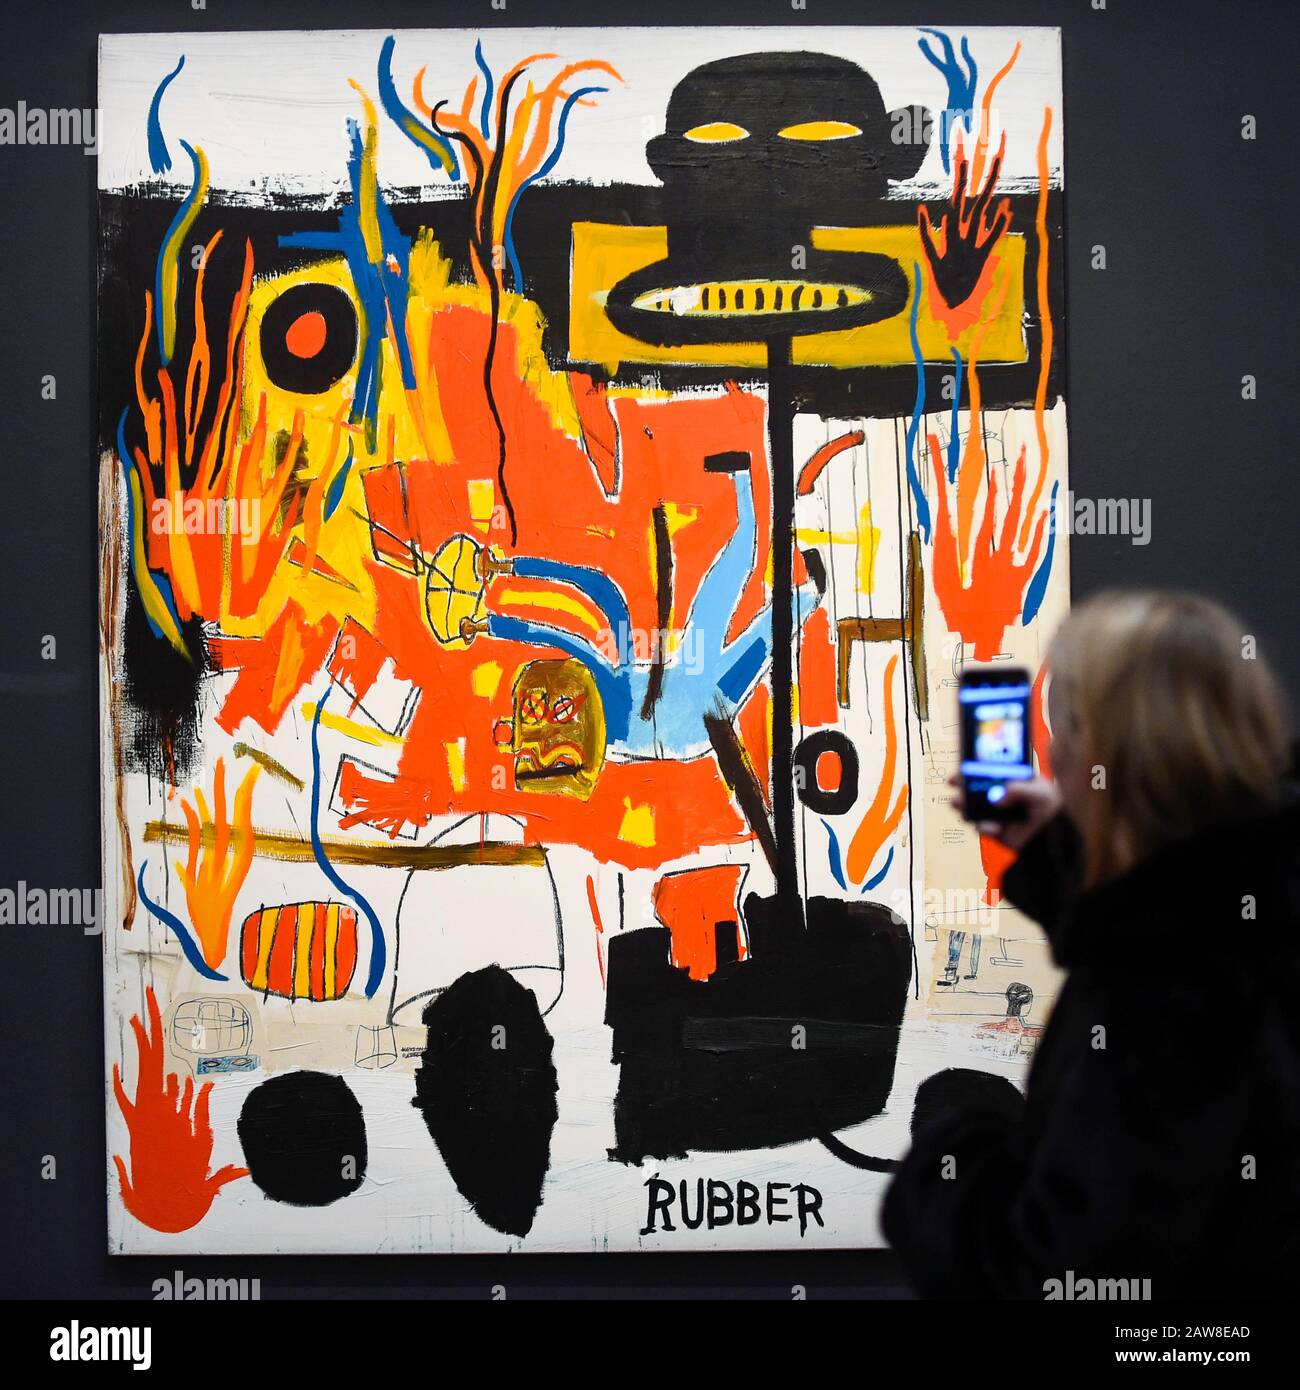 London, UK.  7 February 2020.  A visitor views ''Rubber'' by Jean-Michel Basquiat, (Est. £6,000,000 - 8,000,000). Preview of Sotheby's Contemporary Art Sale in their New Bond Street galleries.  Works by artists including Francis Bacon, Yves Klein, Jean-Michel Basquiat and David Hockney will be offered for auction on 11 February 2020.  Credit: Stephen Chung / Alamy Live News Stock Photo